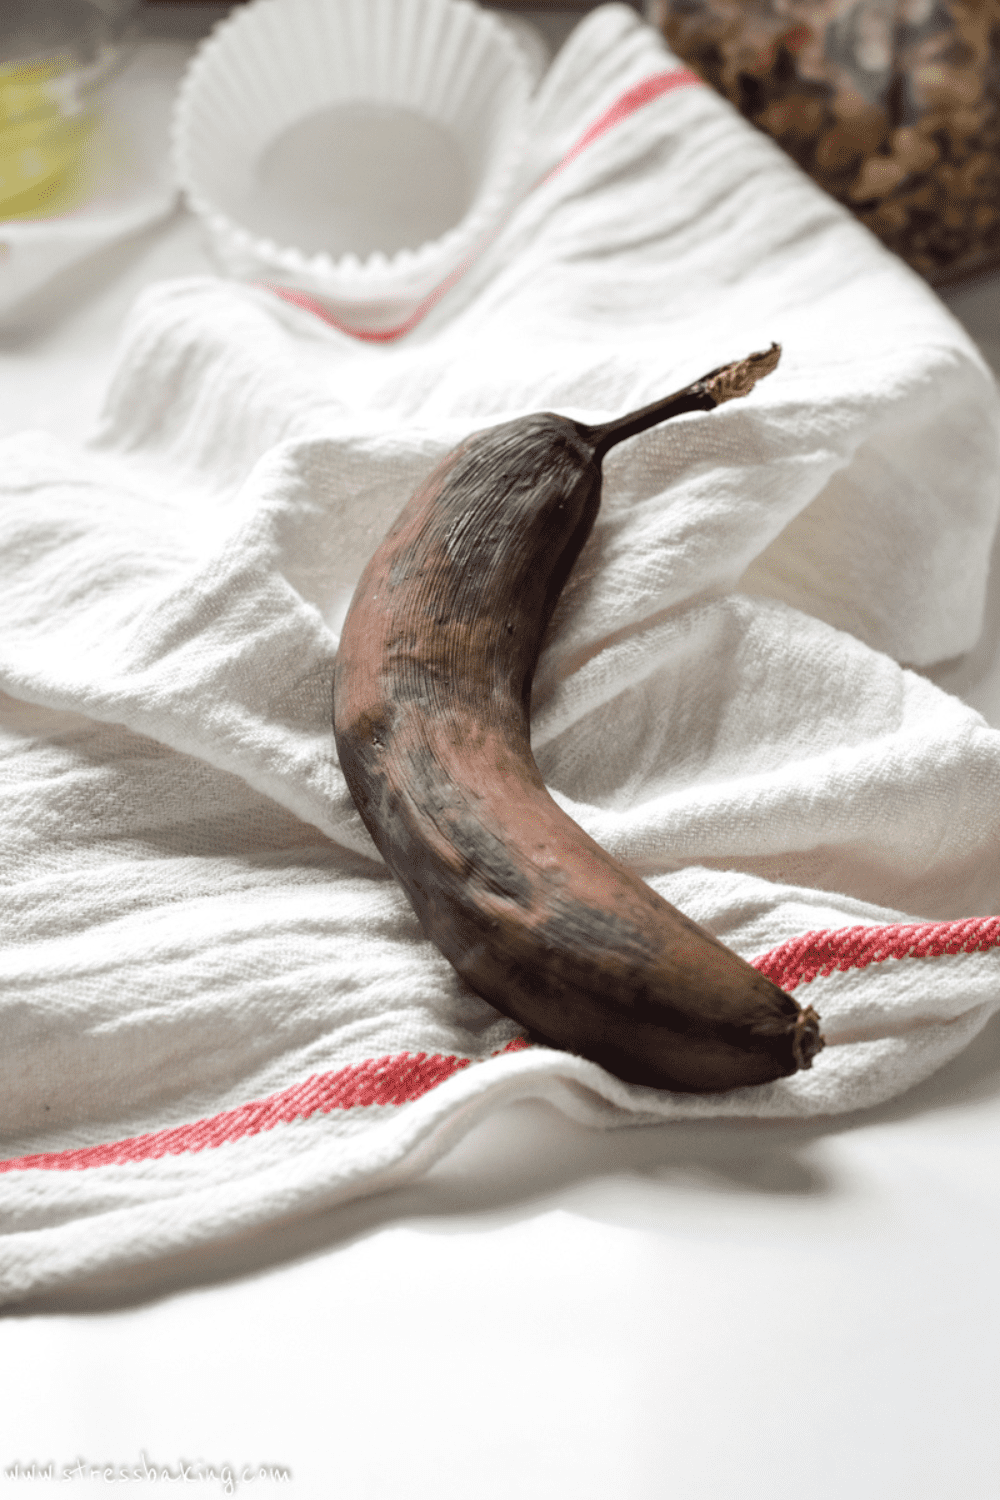 Brown and black overripe banana on a white and red dishtowel